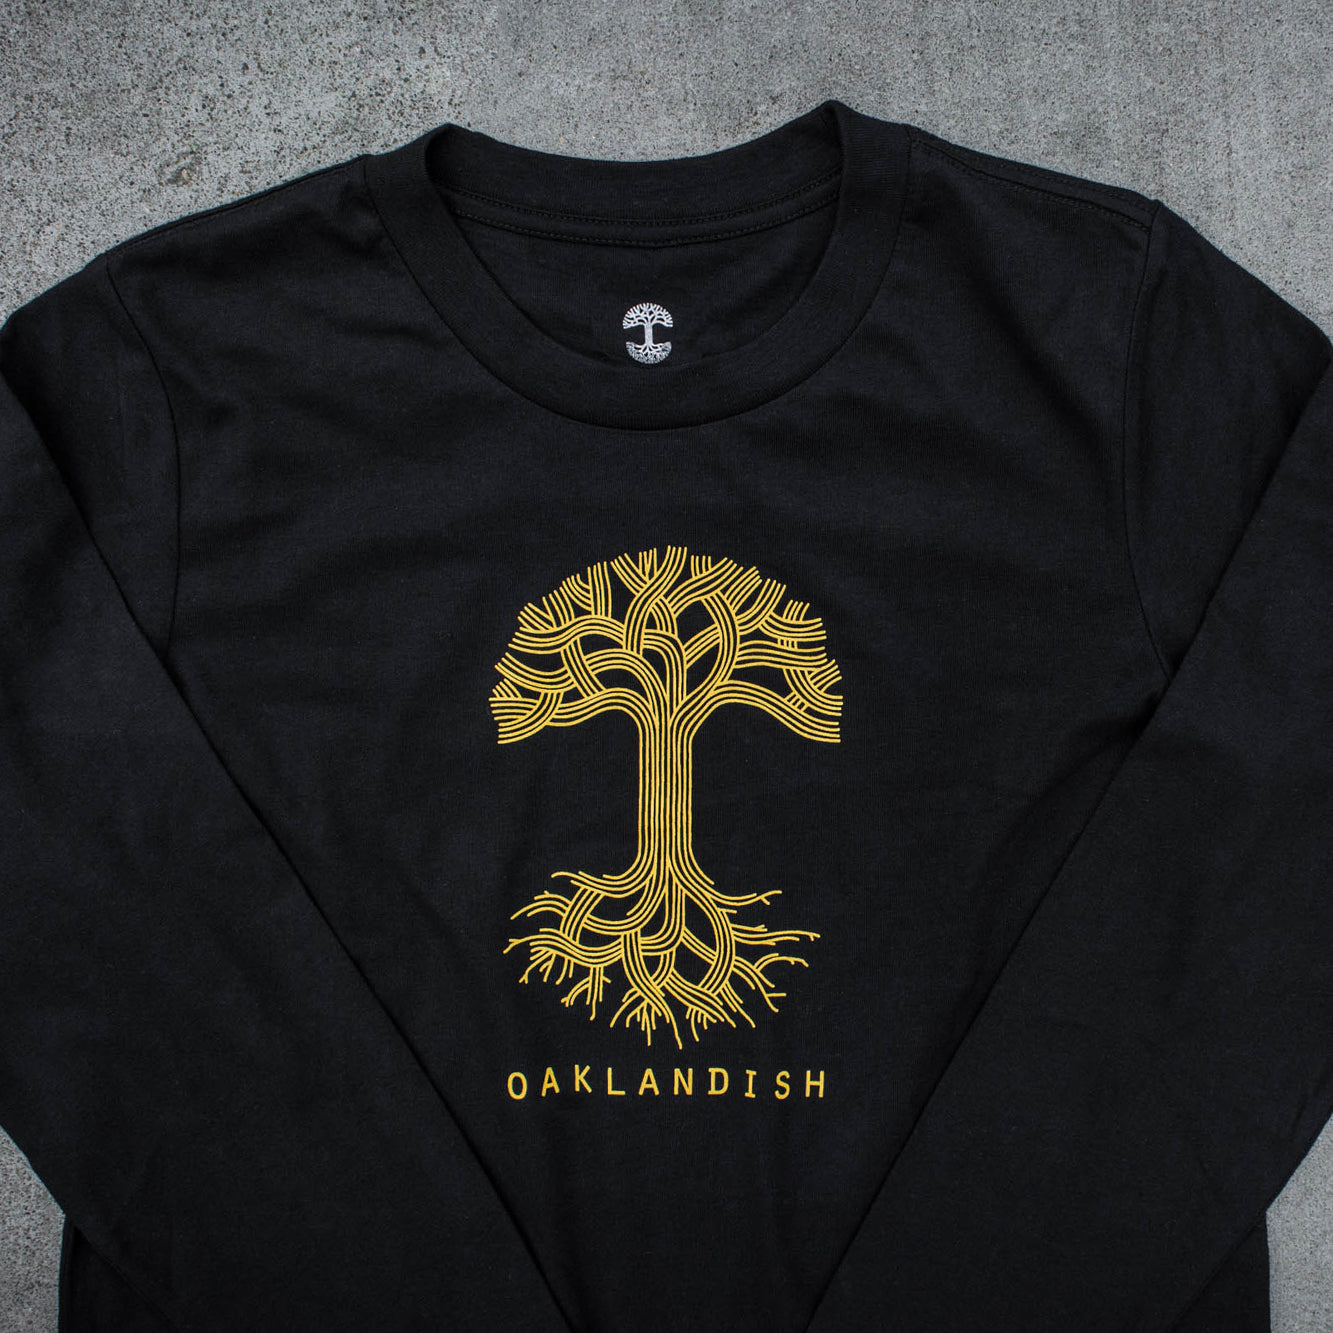 Close-up of gold Oaklandish tree logo and wordmark on the chest of a women’s cut black long-sleeve t-shirt with arms folded.